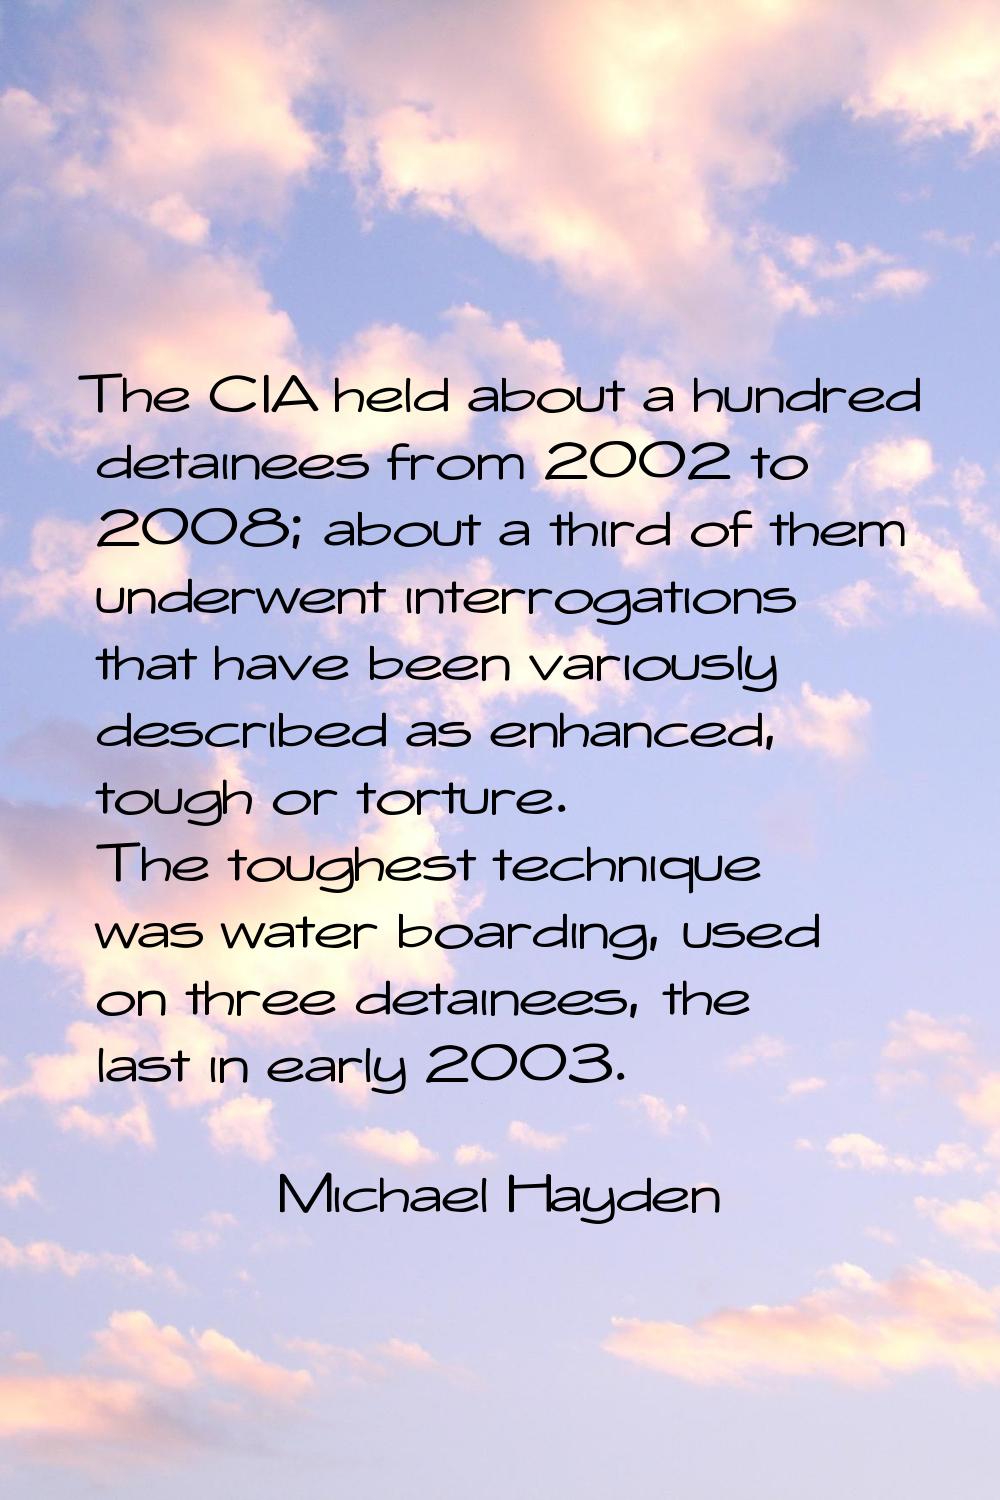 The CIA held about a hundred detainees from 2002 to 2008; about a third of them underwent interroga